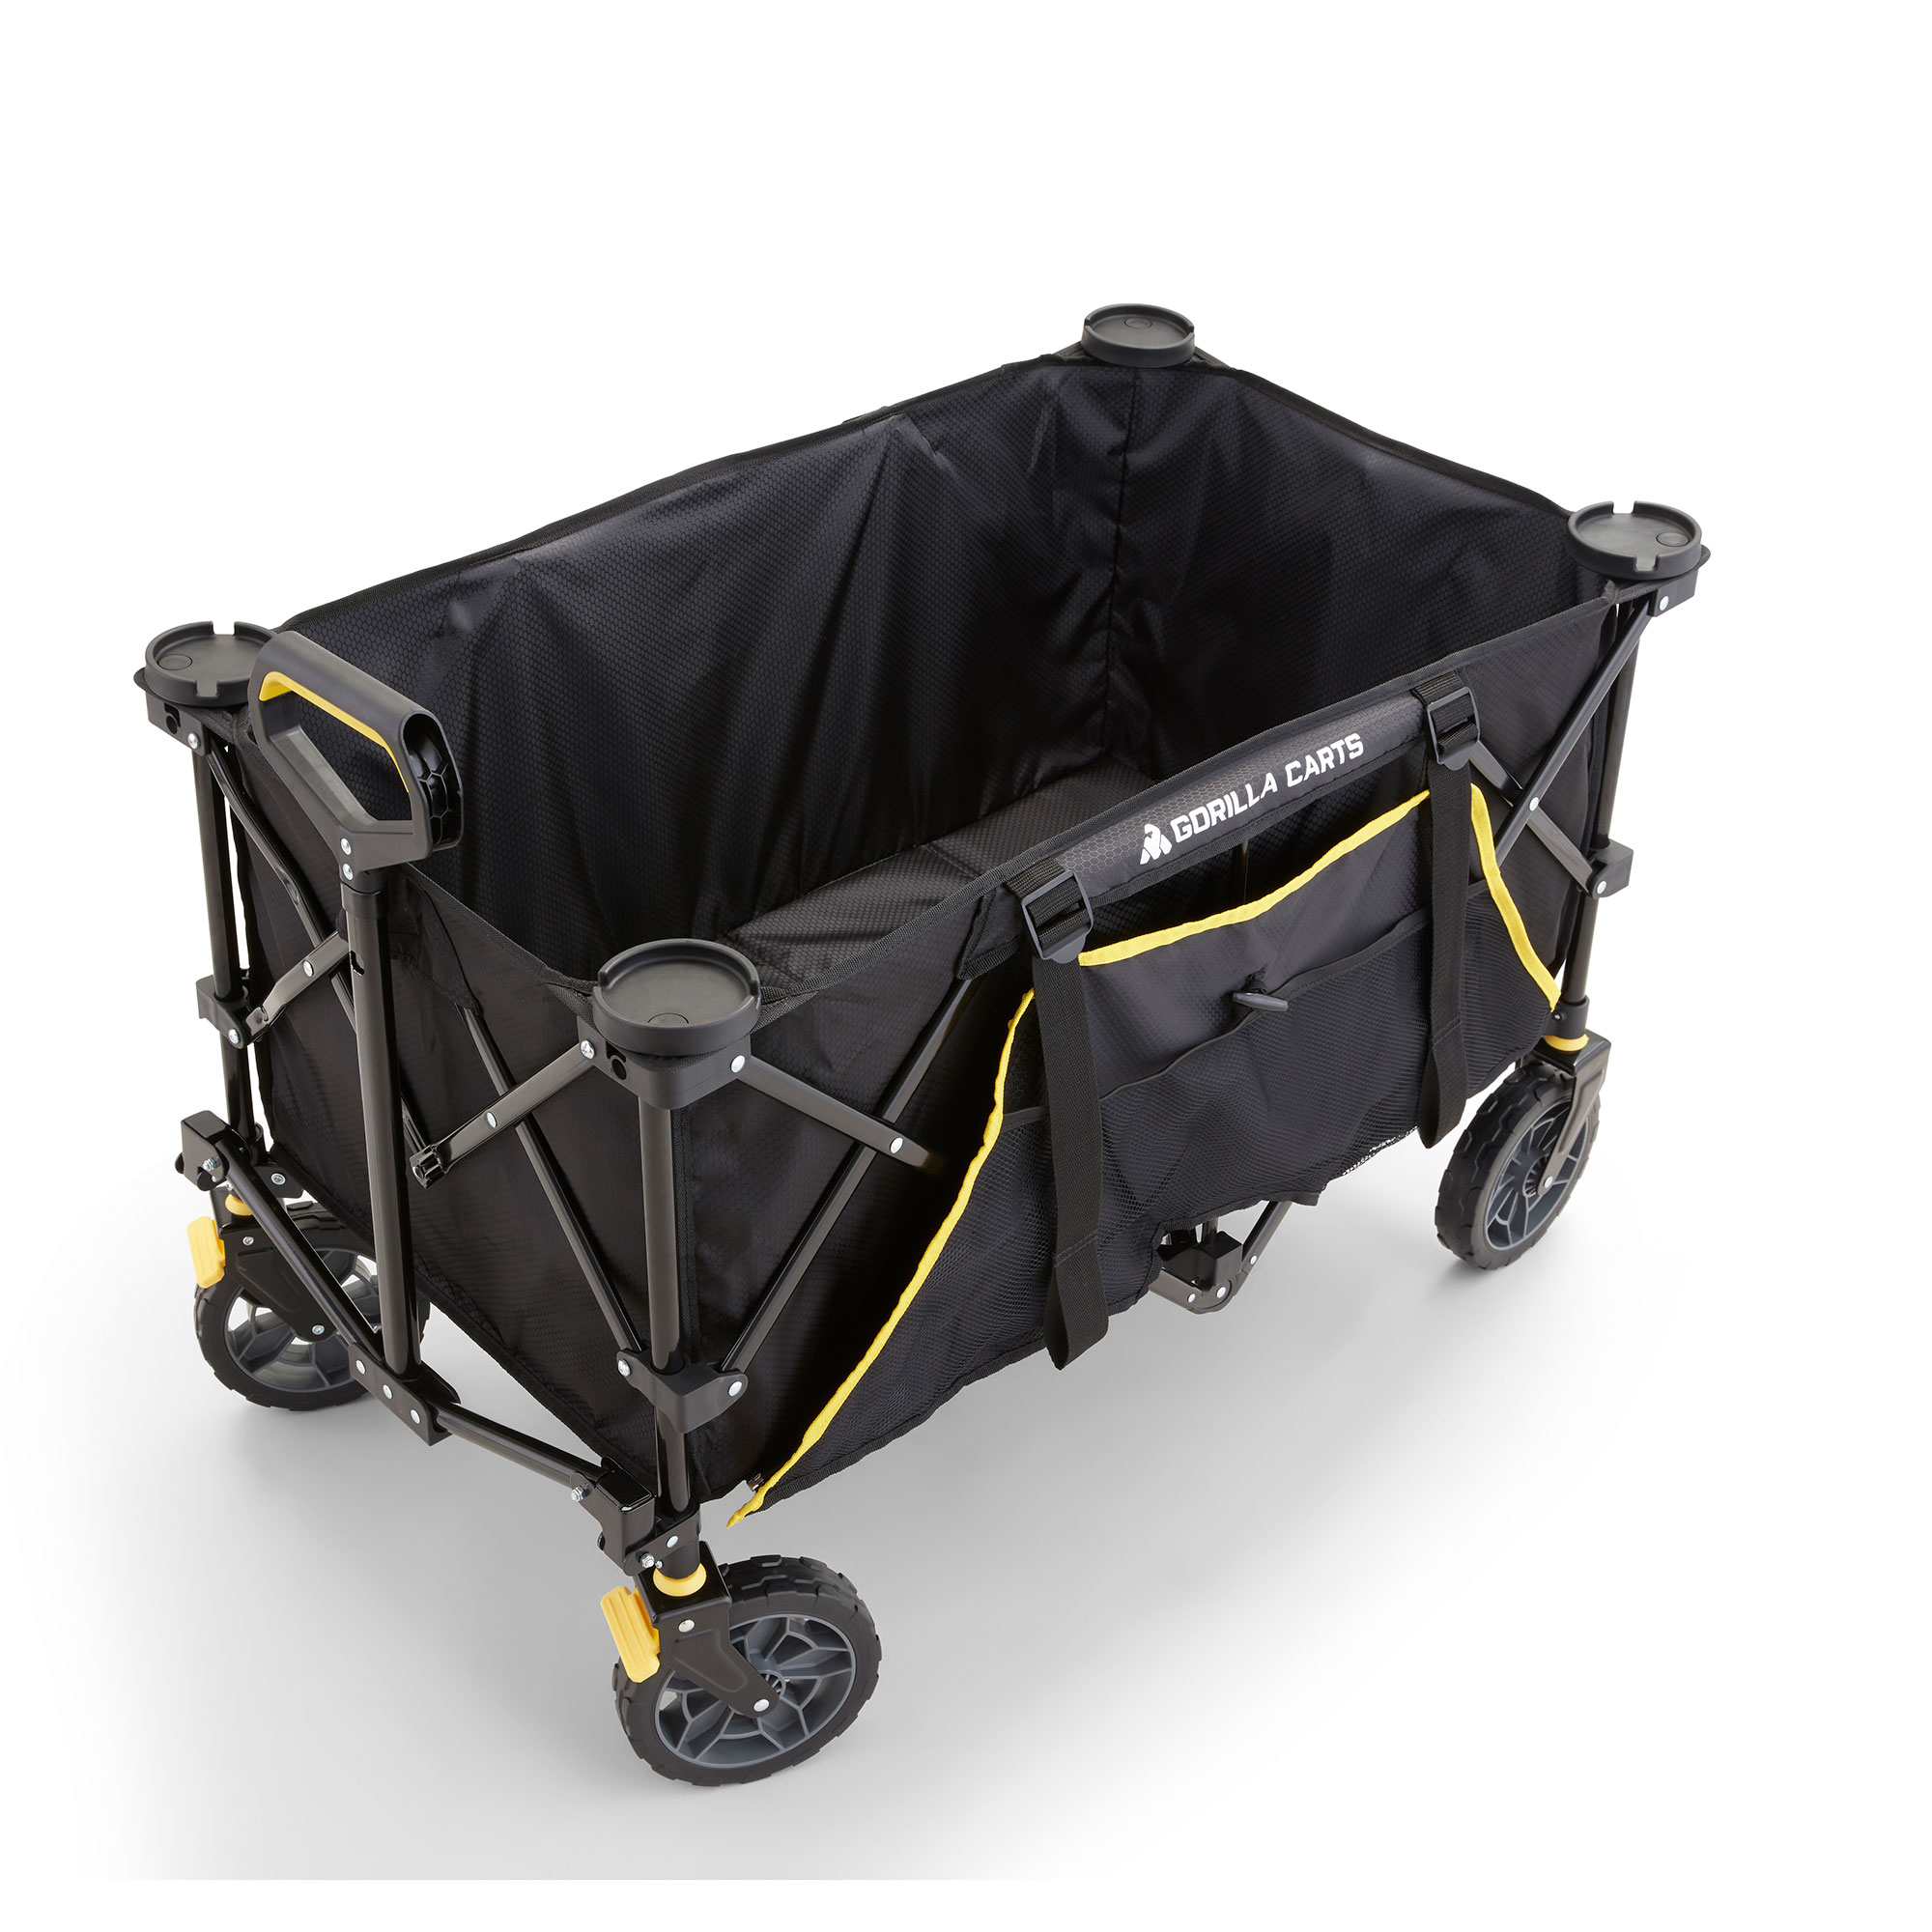 Gorilla Carts 7 Cu Ft Collapsible Outdoor Utility Wagon,Oversize Bed, Black - image 4 of 11